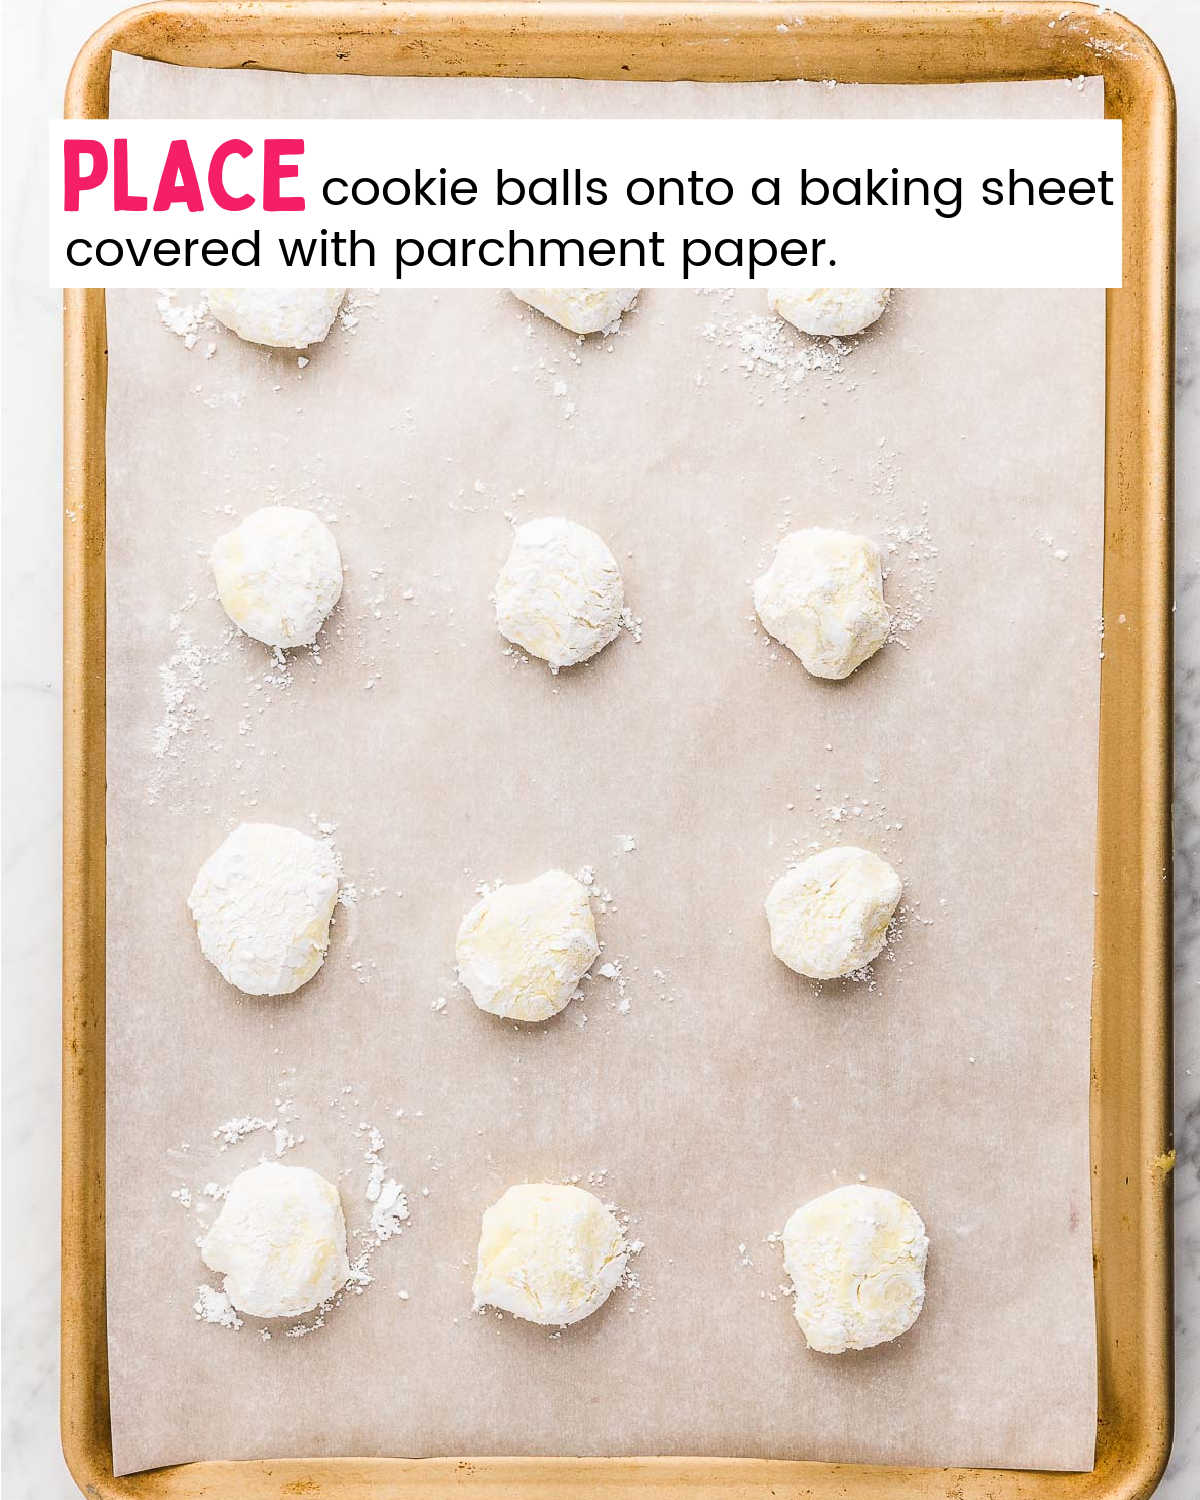 Process Step: Place sugar-coated cookies on baking sheet.